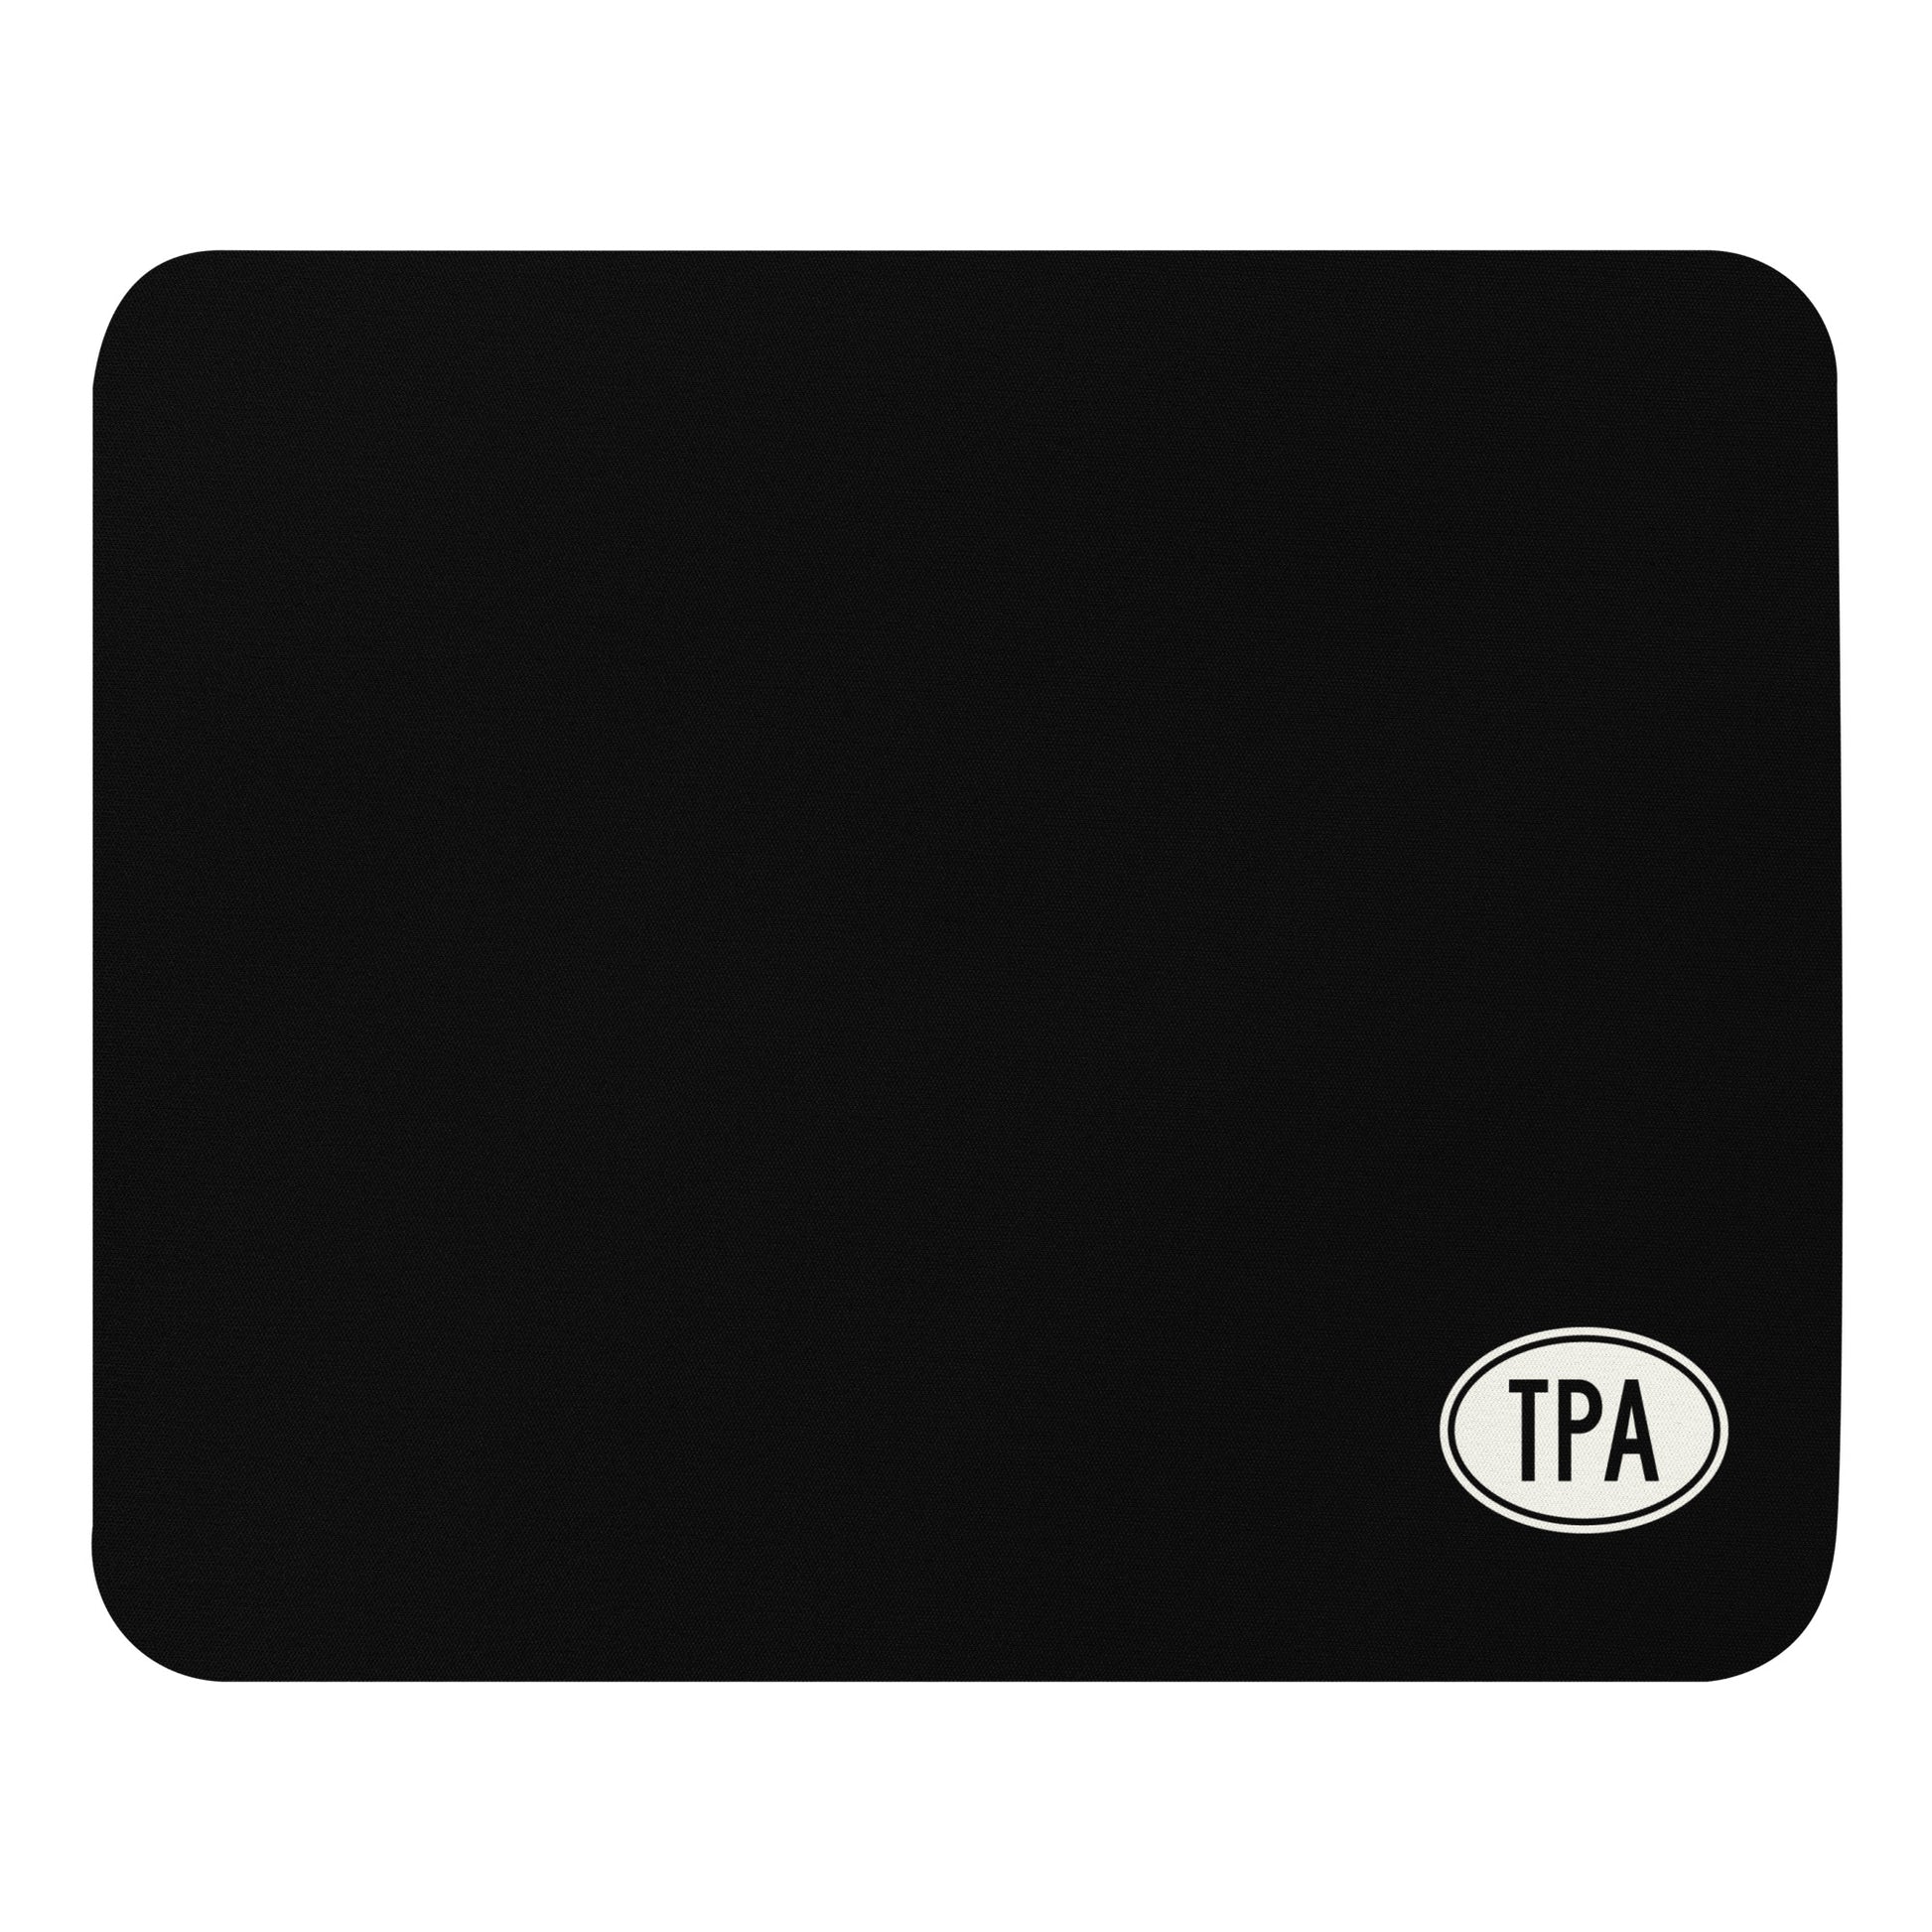 Unique Travel Gift Mouse Pad - White Oval • TPA Tampa • YHM Designs - Image 01